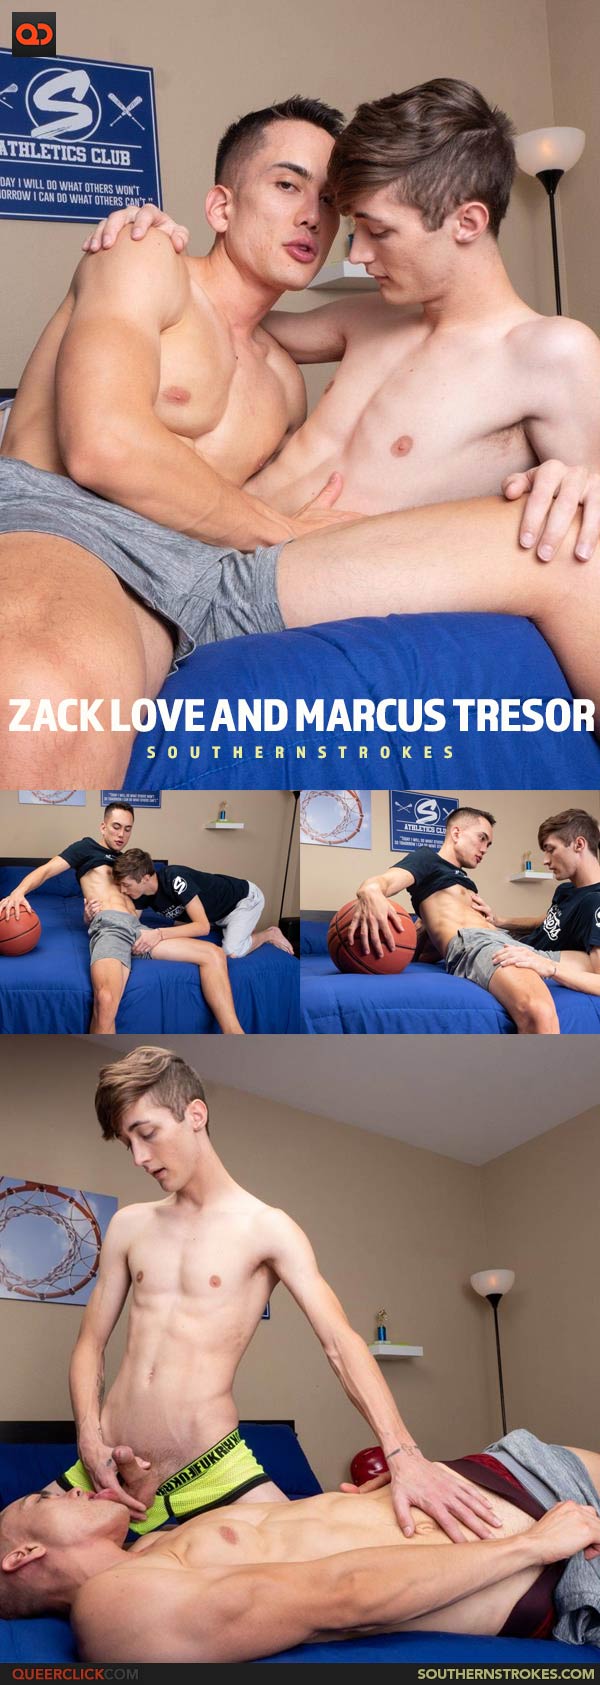 Southern Strokes: Zack Love and Marcus Tresor